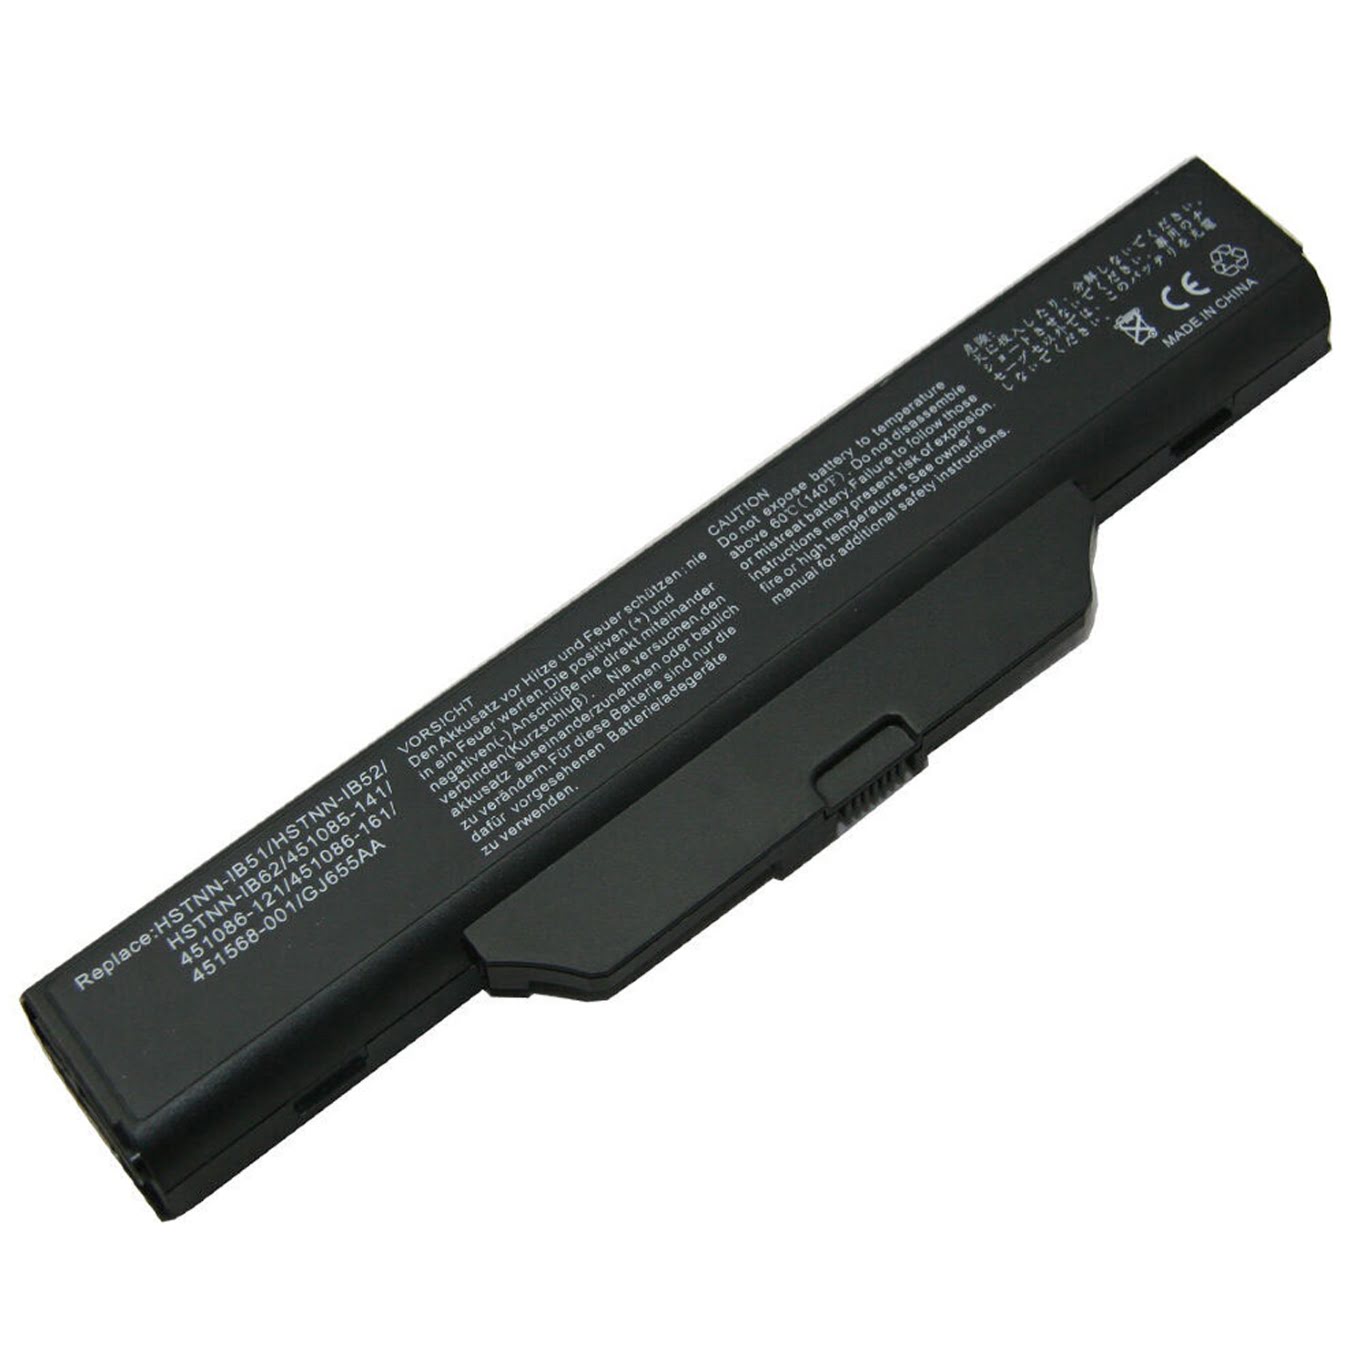 451085-121, 451085-141 replacement Laptop Battery for HP 550, 610, 10.8V, 6 cells, 4400mAh